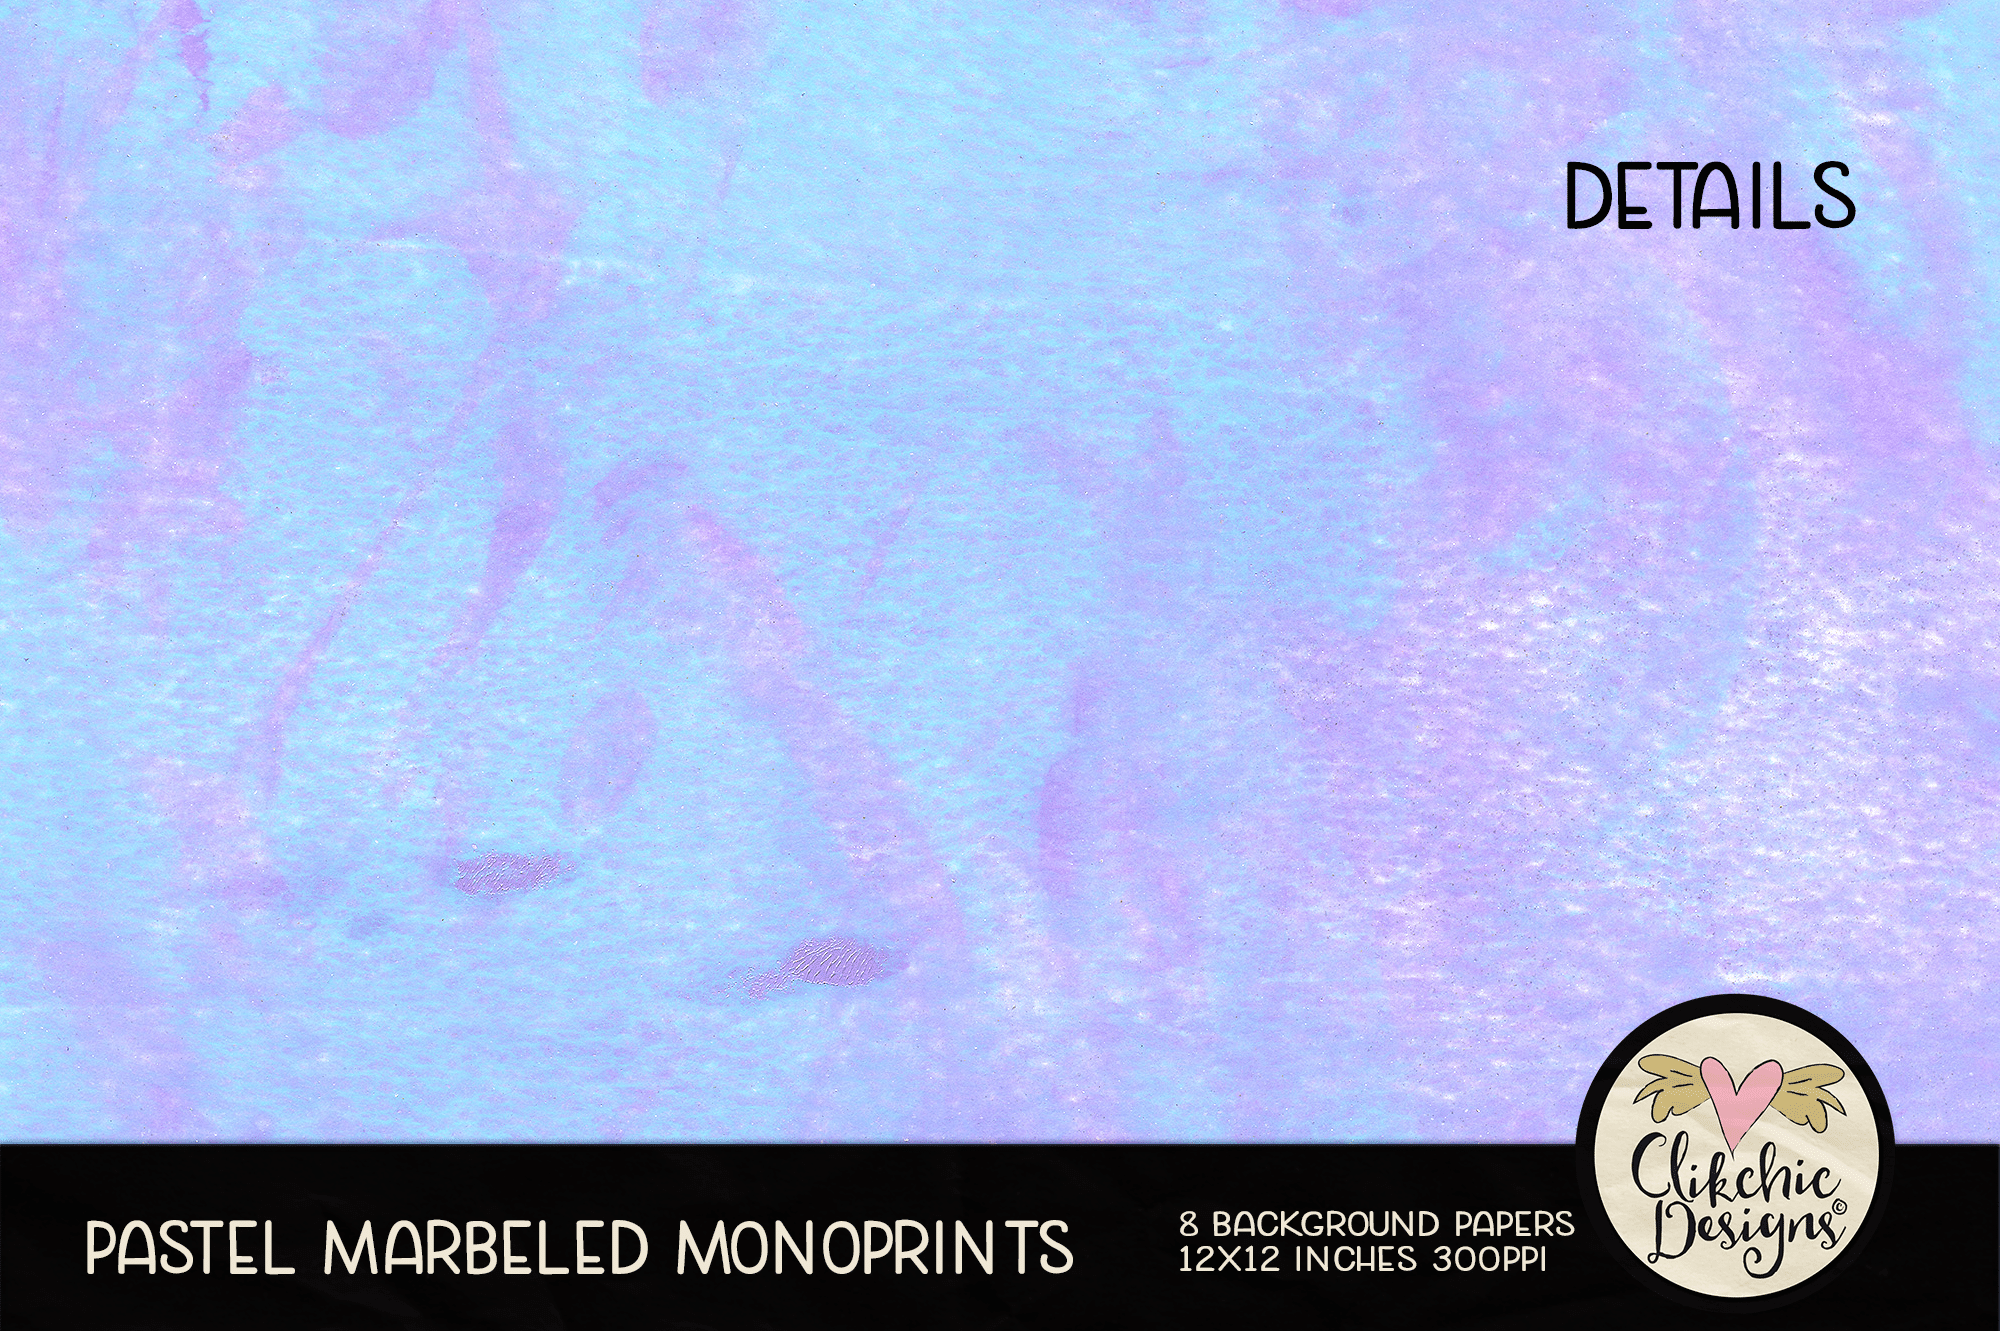 Pastel Marbled Monoprints Background Papers by Clikchic Designs